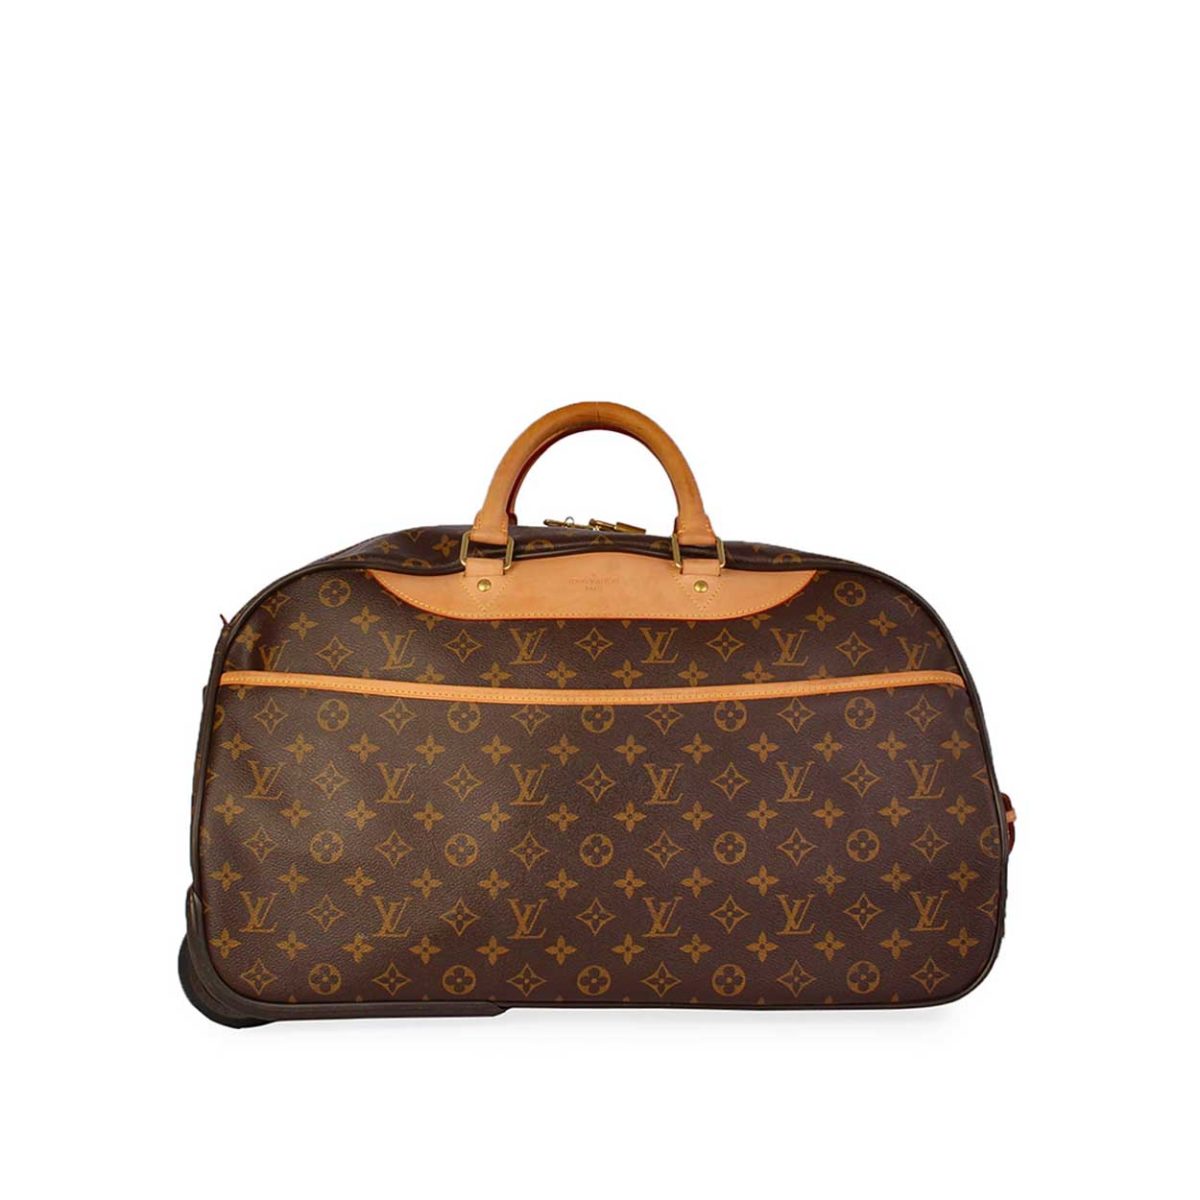 Louis Vuitton Rolling Luggage - 11 For Sale on 1stDibs  louis vuitton  luggage, louis vuitton rolling suitcase, louis vuitton carry on luggage